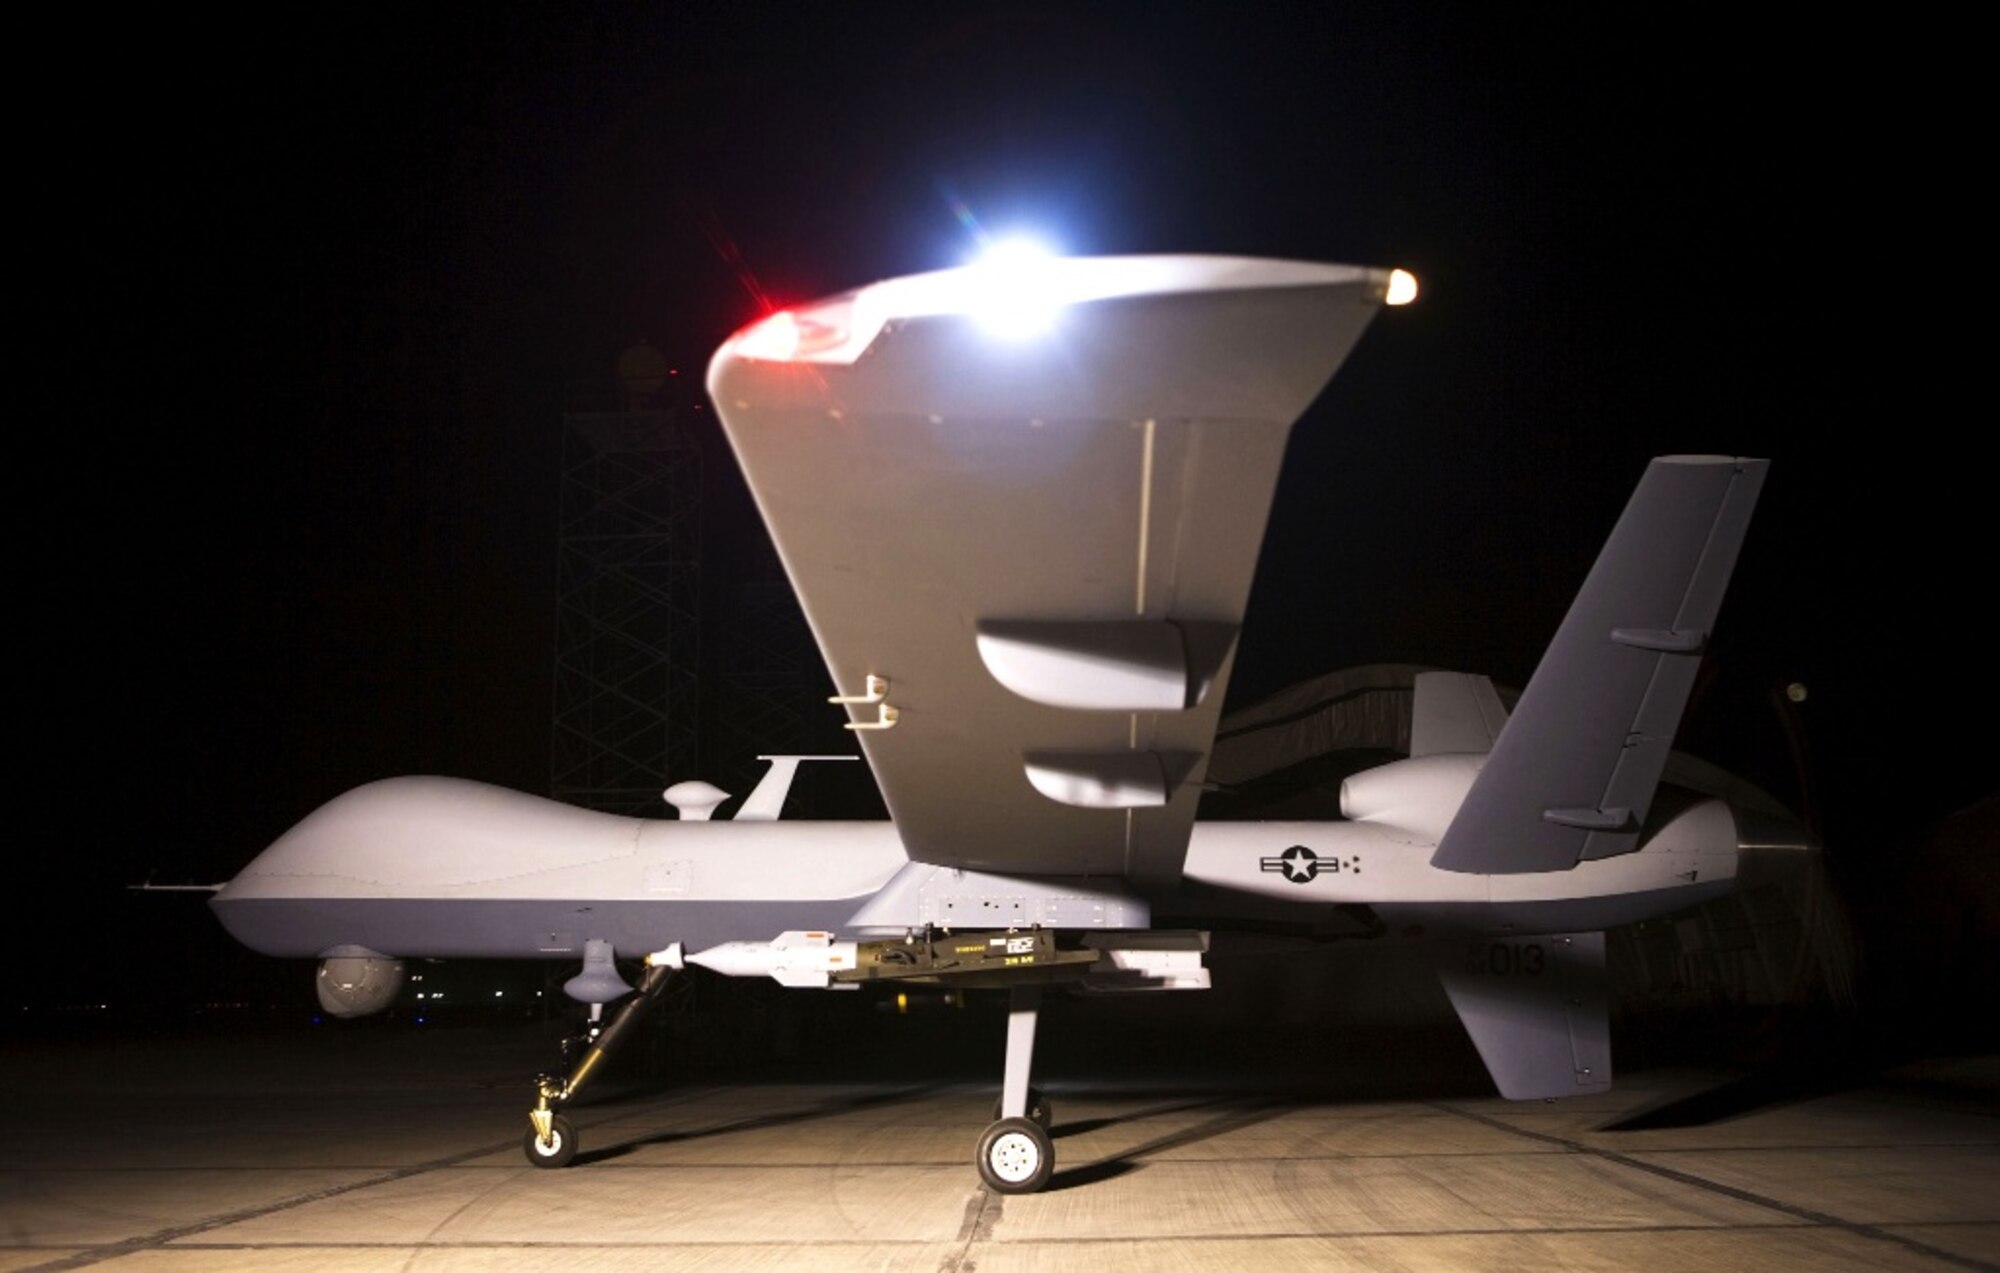 An MQ-9 Reaper remotely piloted aircraft sits on a ramp. The Reaper is an armed, multi-mission, medium-altitude, long-endurance remotely piloted aircraft that is employed primarily as an intelligence-collection asset and secondarily against dynamic execution targets.